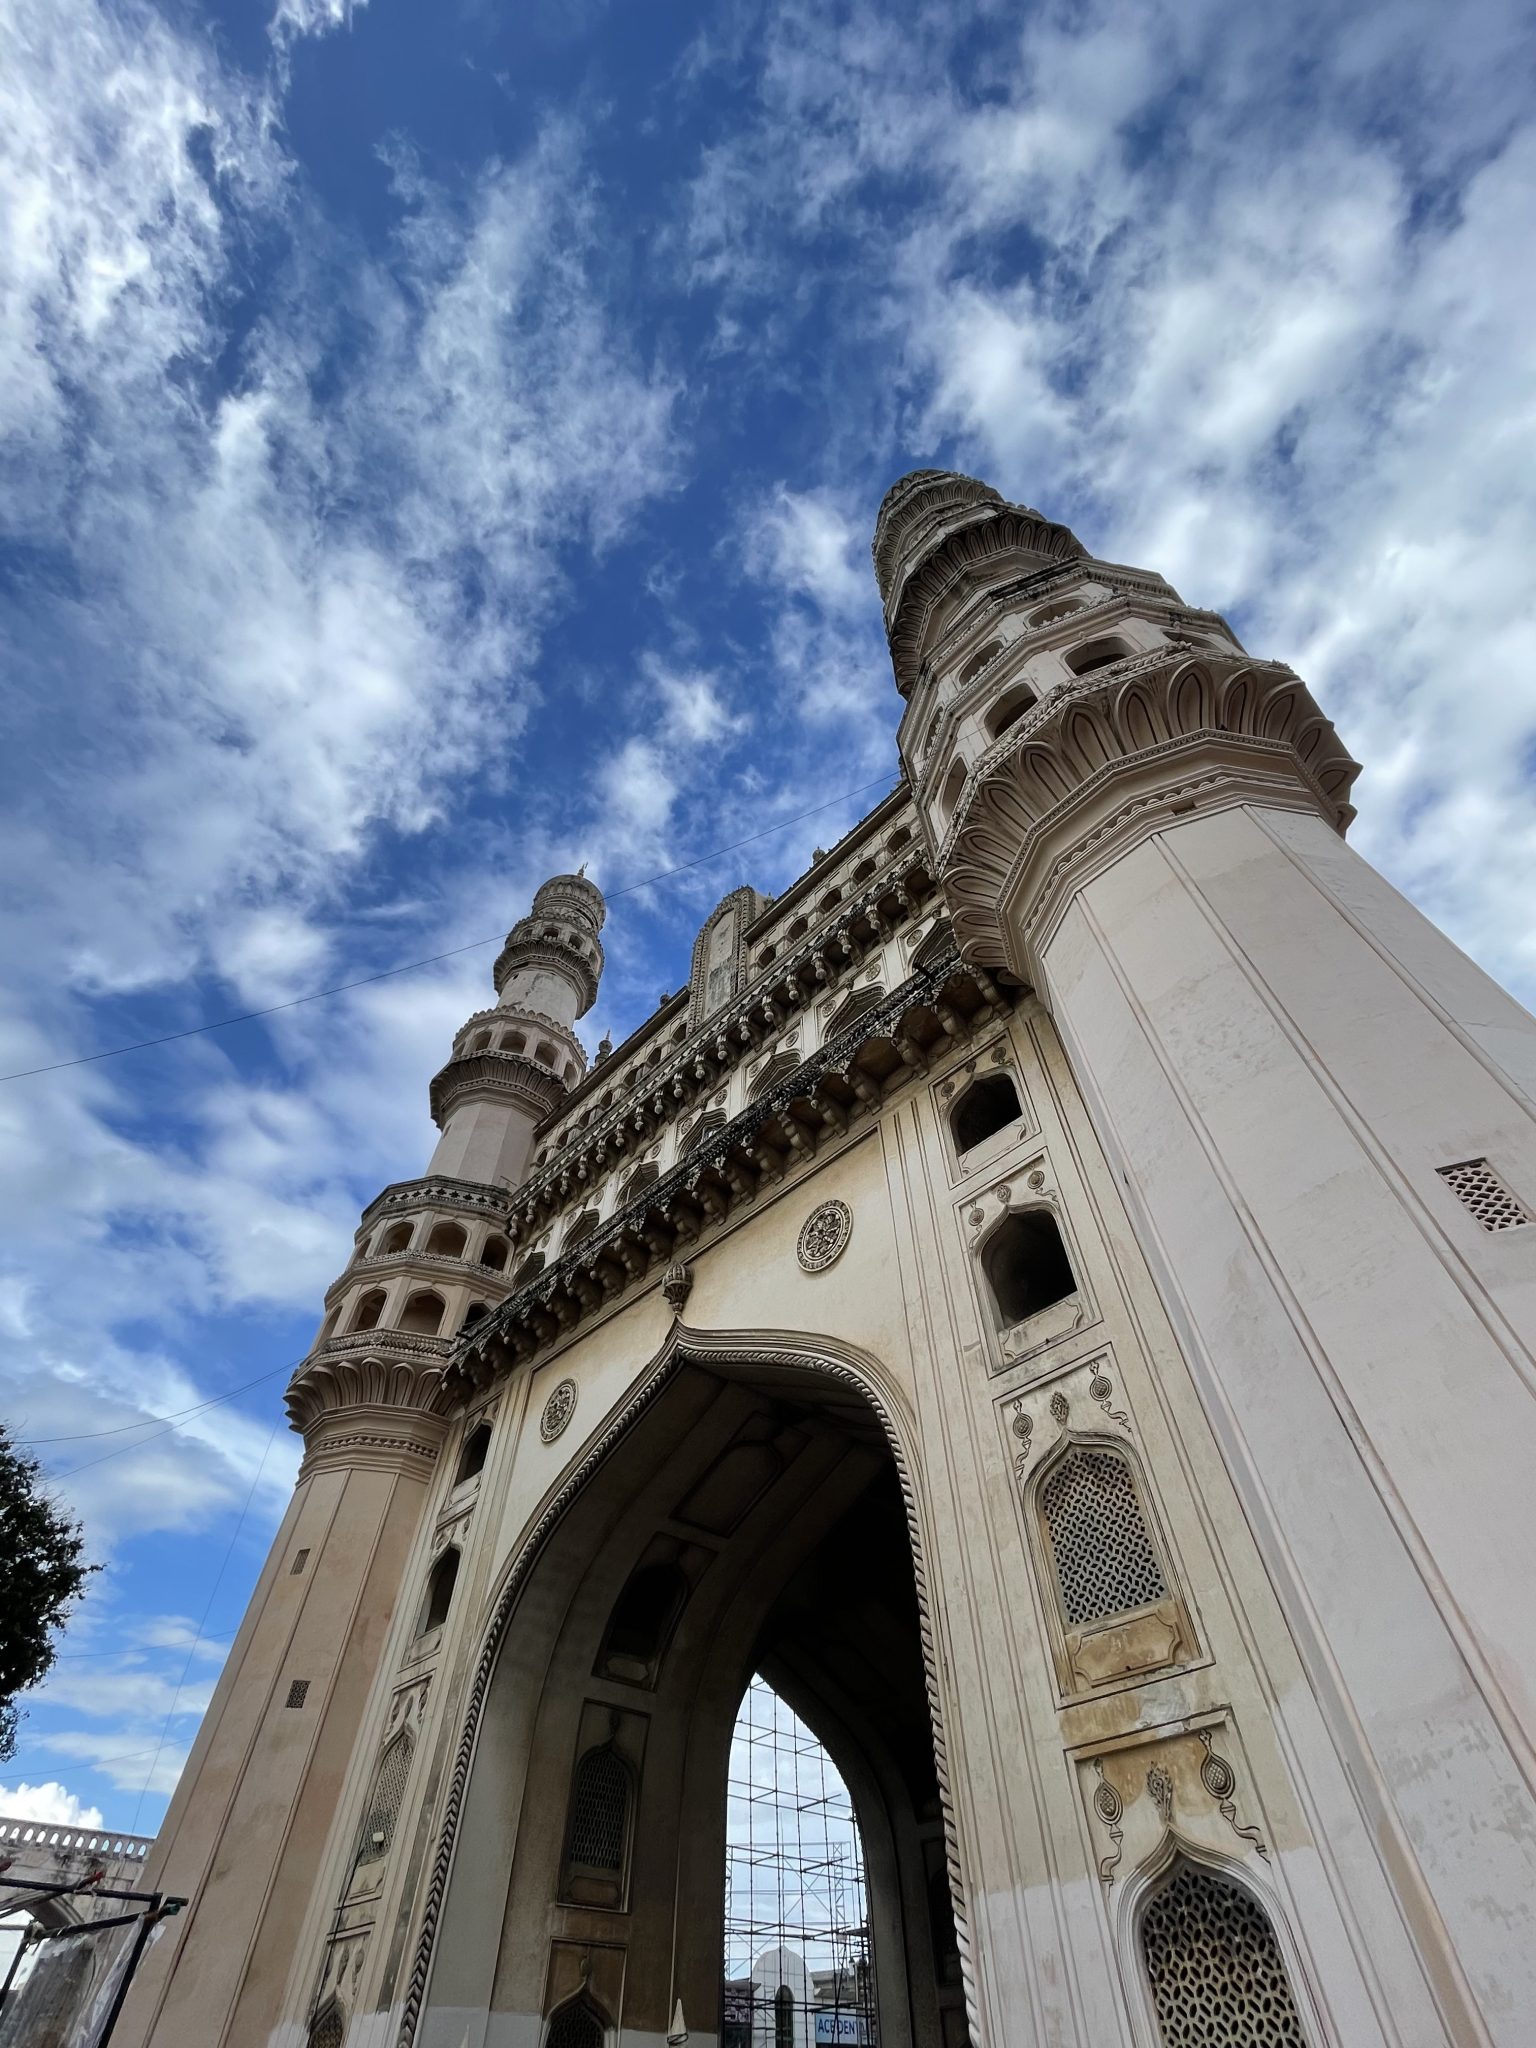 The Char Minar in Hyderabad